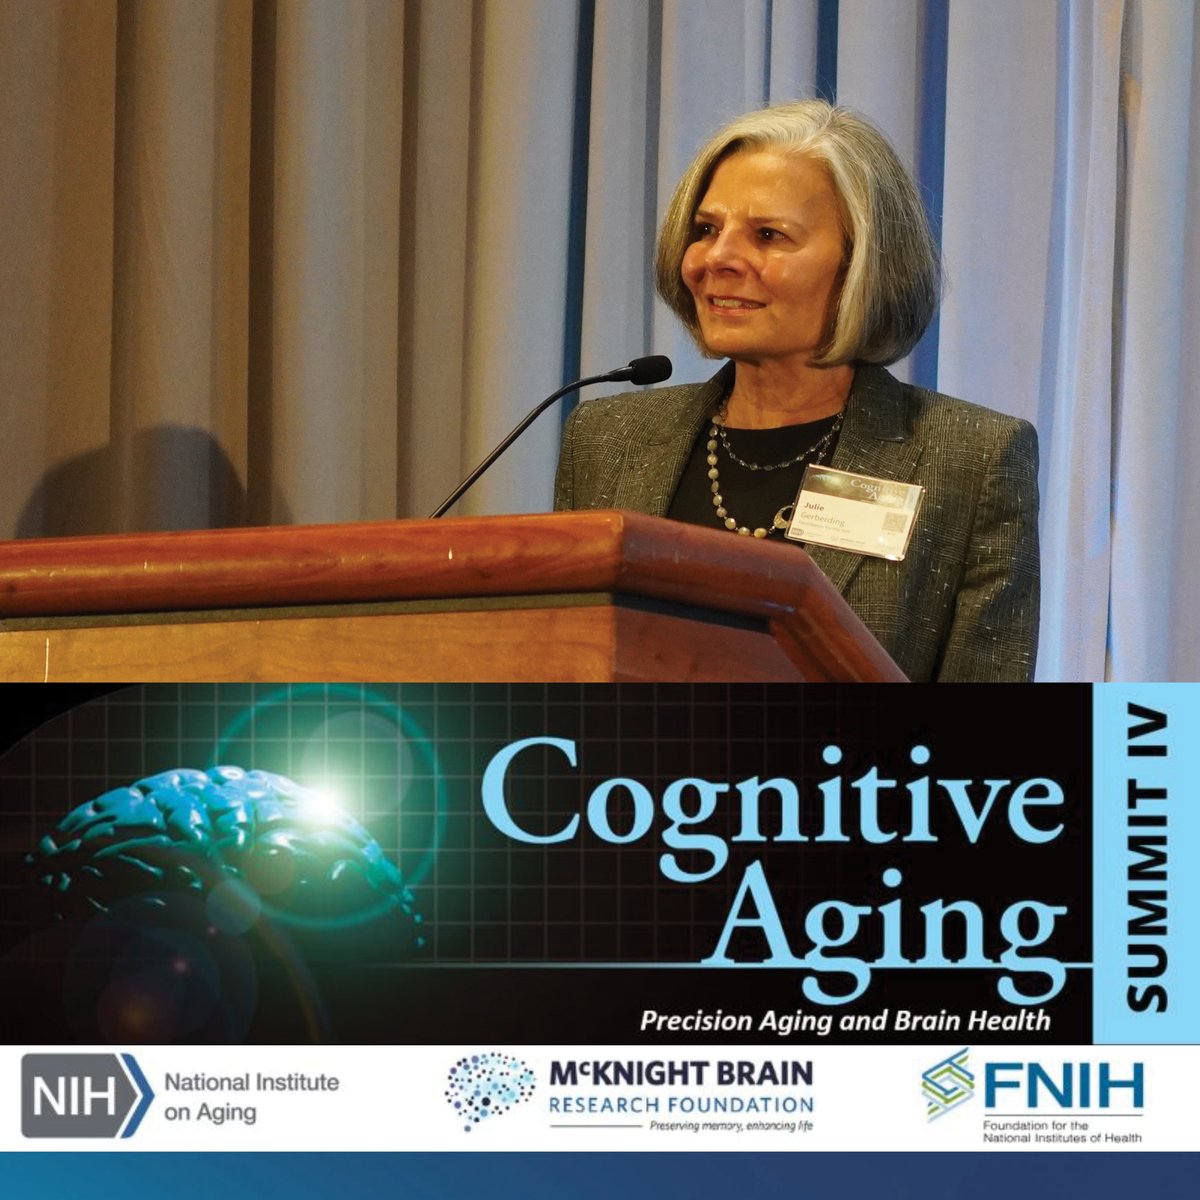 The fourth Cognitive Aging Summit is underway! It’s not too late to join us via livestream to learn about the individual factors that affect brain health as we age: lnkd.in/eJbBhZhV @McKnightBrain1 @NIHAging #CASIV #aging #healthyaging #fnih